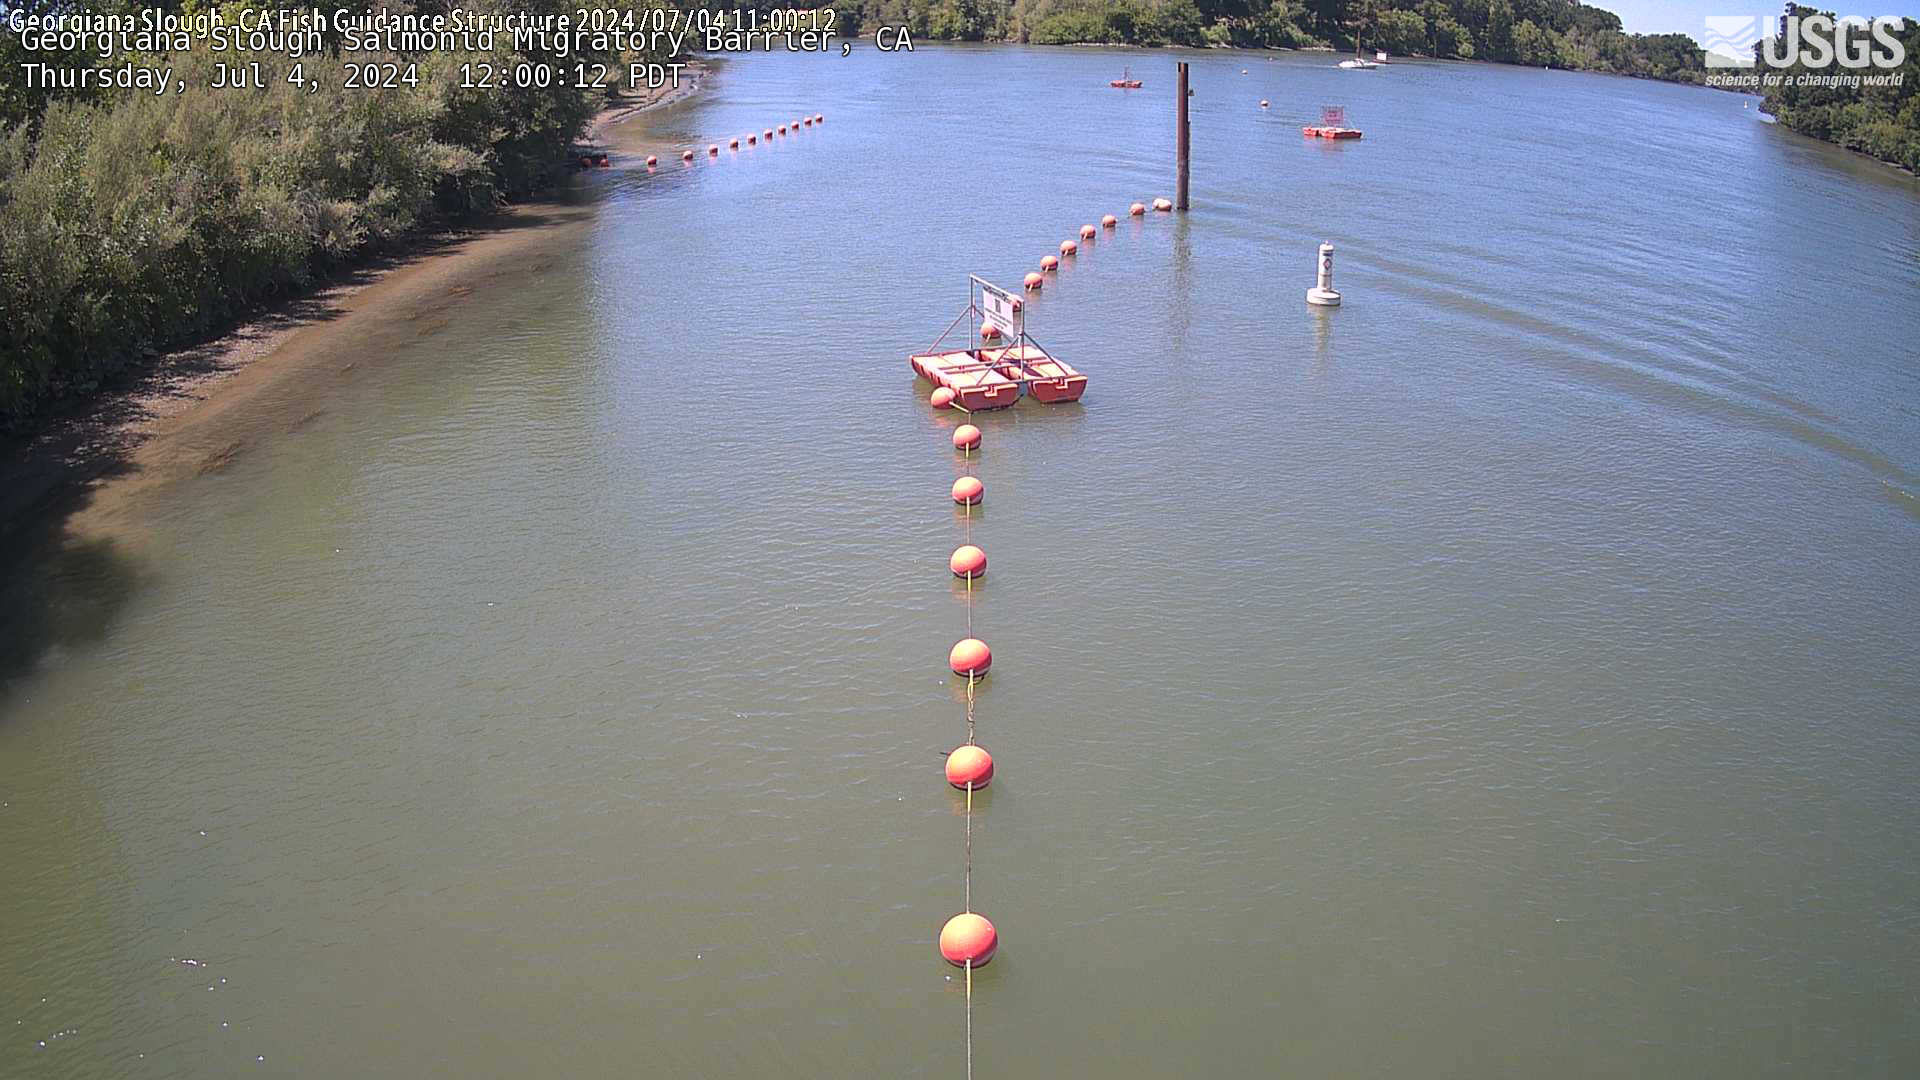 This is the most recent camera image of Georgiana Slough Salmonid Migratory Barrier webcam